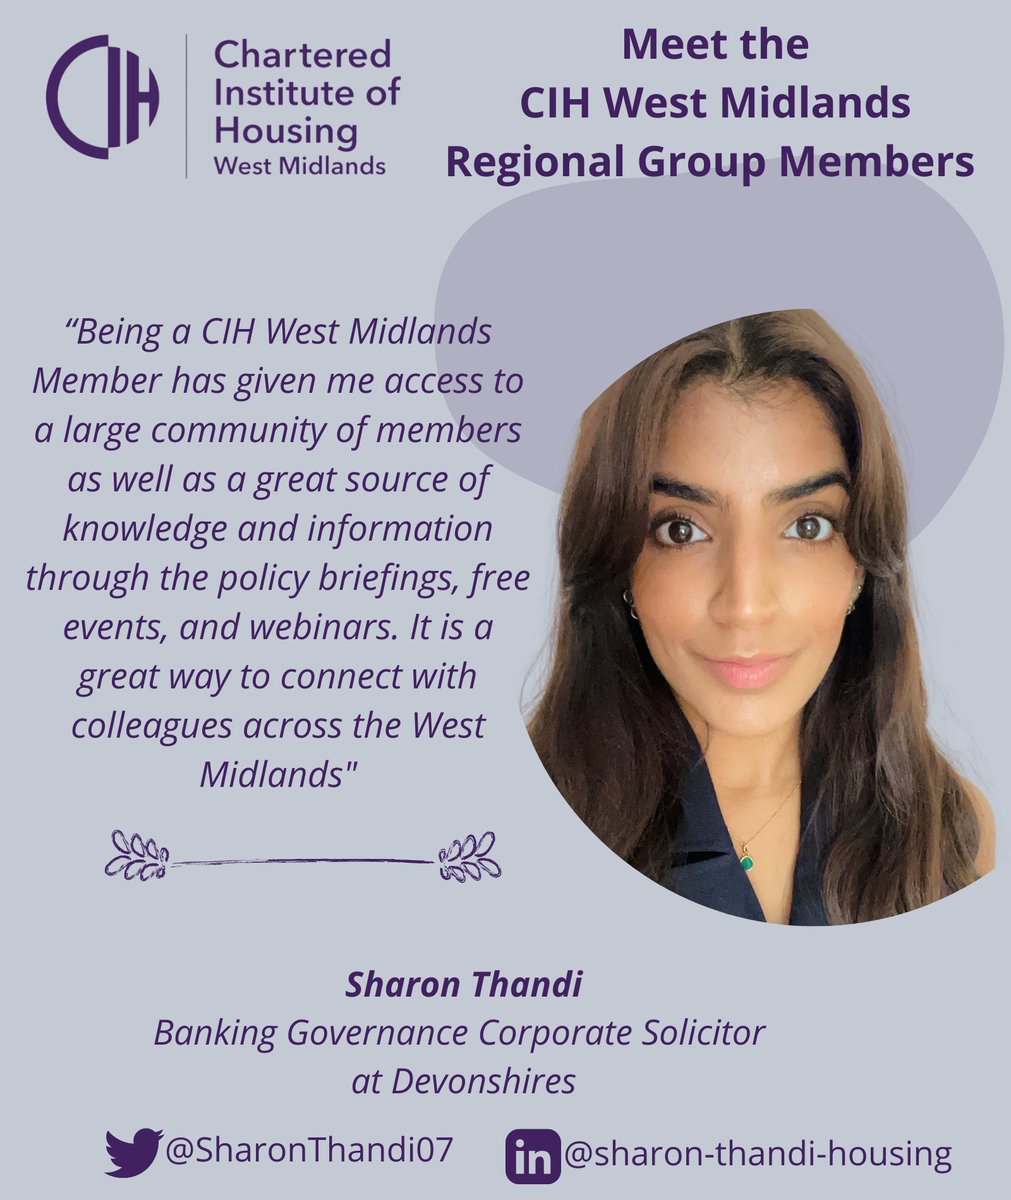 Our next CIH West Midlands featured regional group member is Sharon Thandi @SharonThandi07, a Banking Governance Corporate Solicitor at @Devonshires. “Being a @CIHWestMidlands member has given her access to a large community of members”